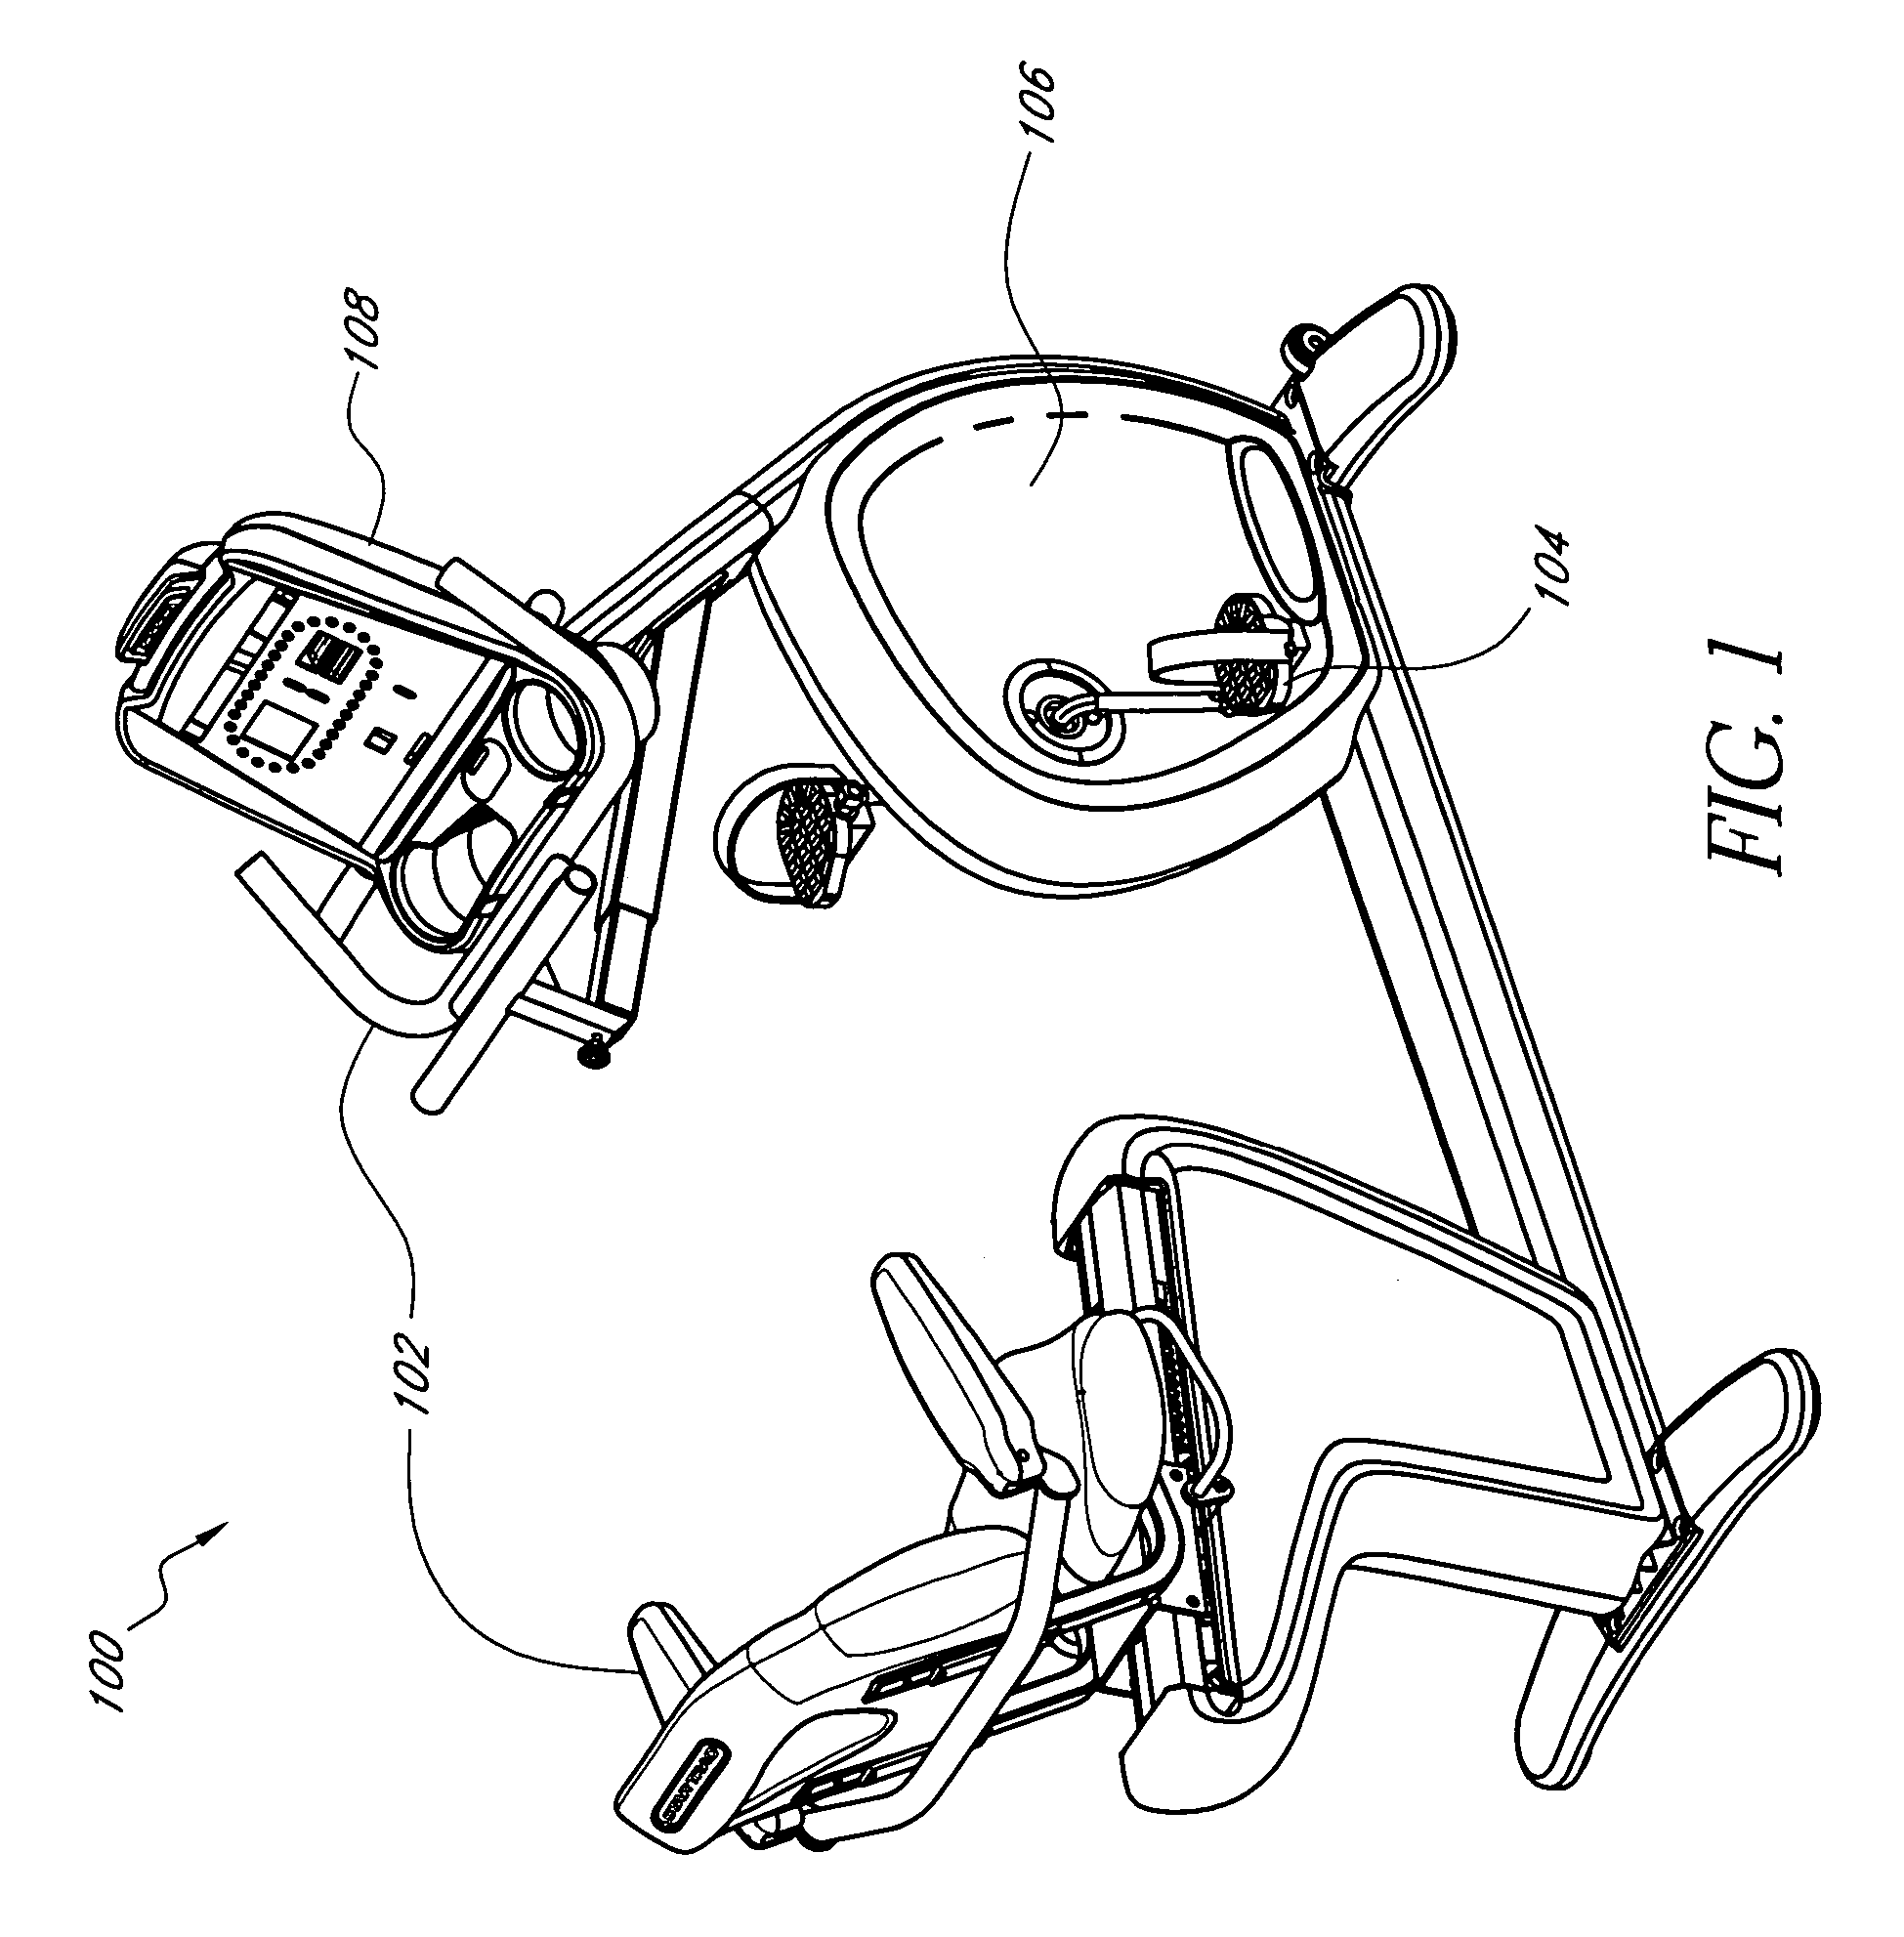 System and method for electronically controlling resistance of an exercise machine